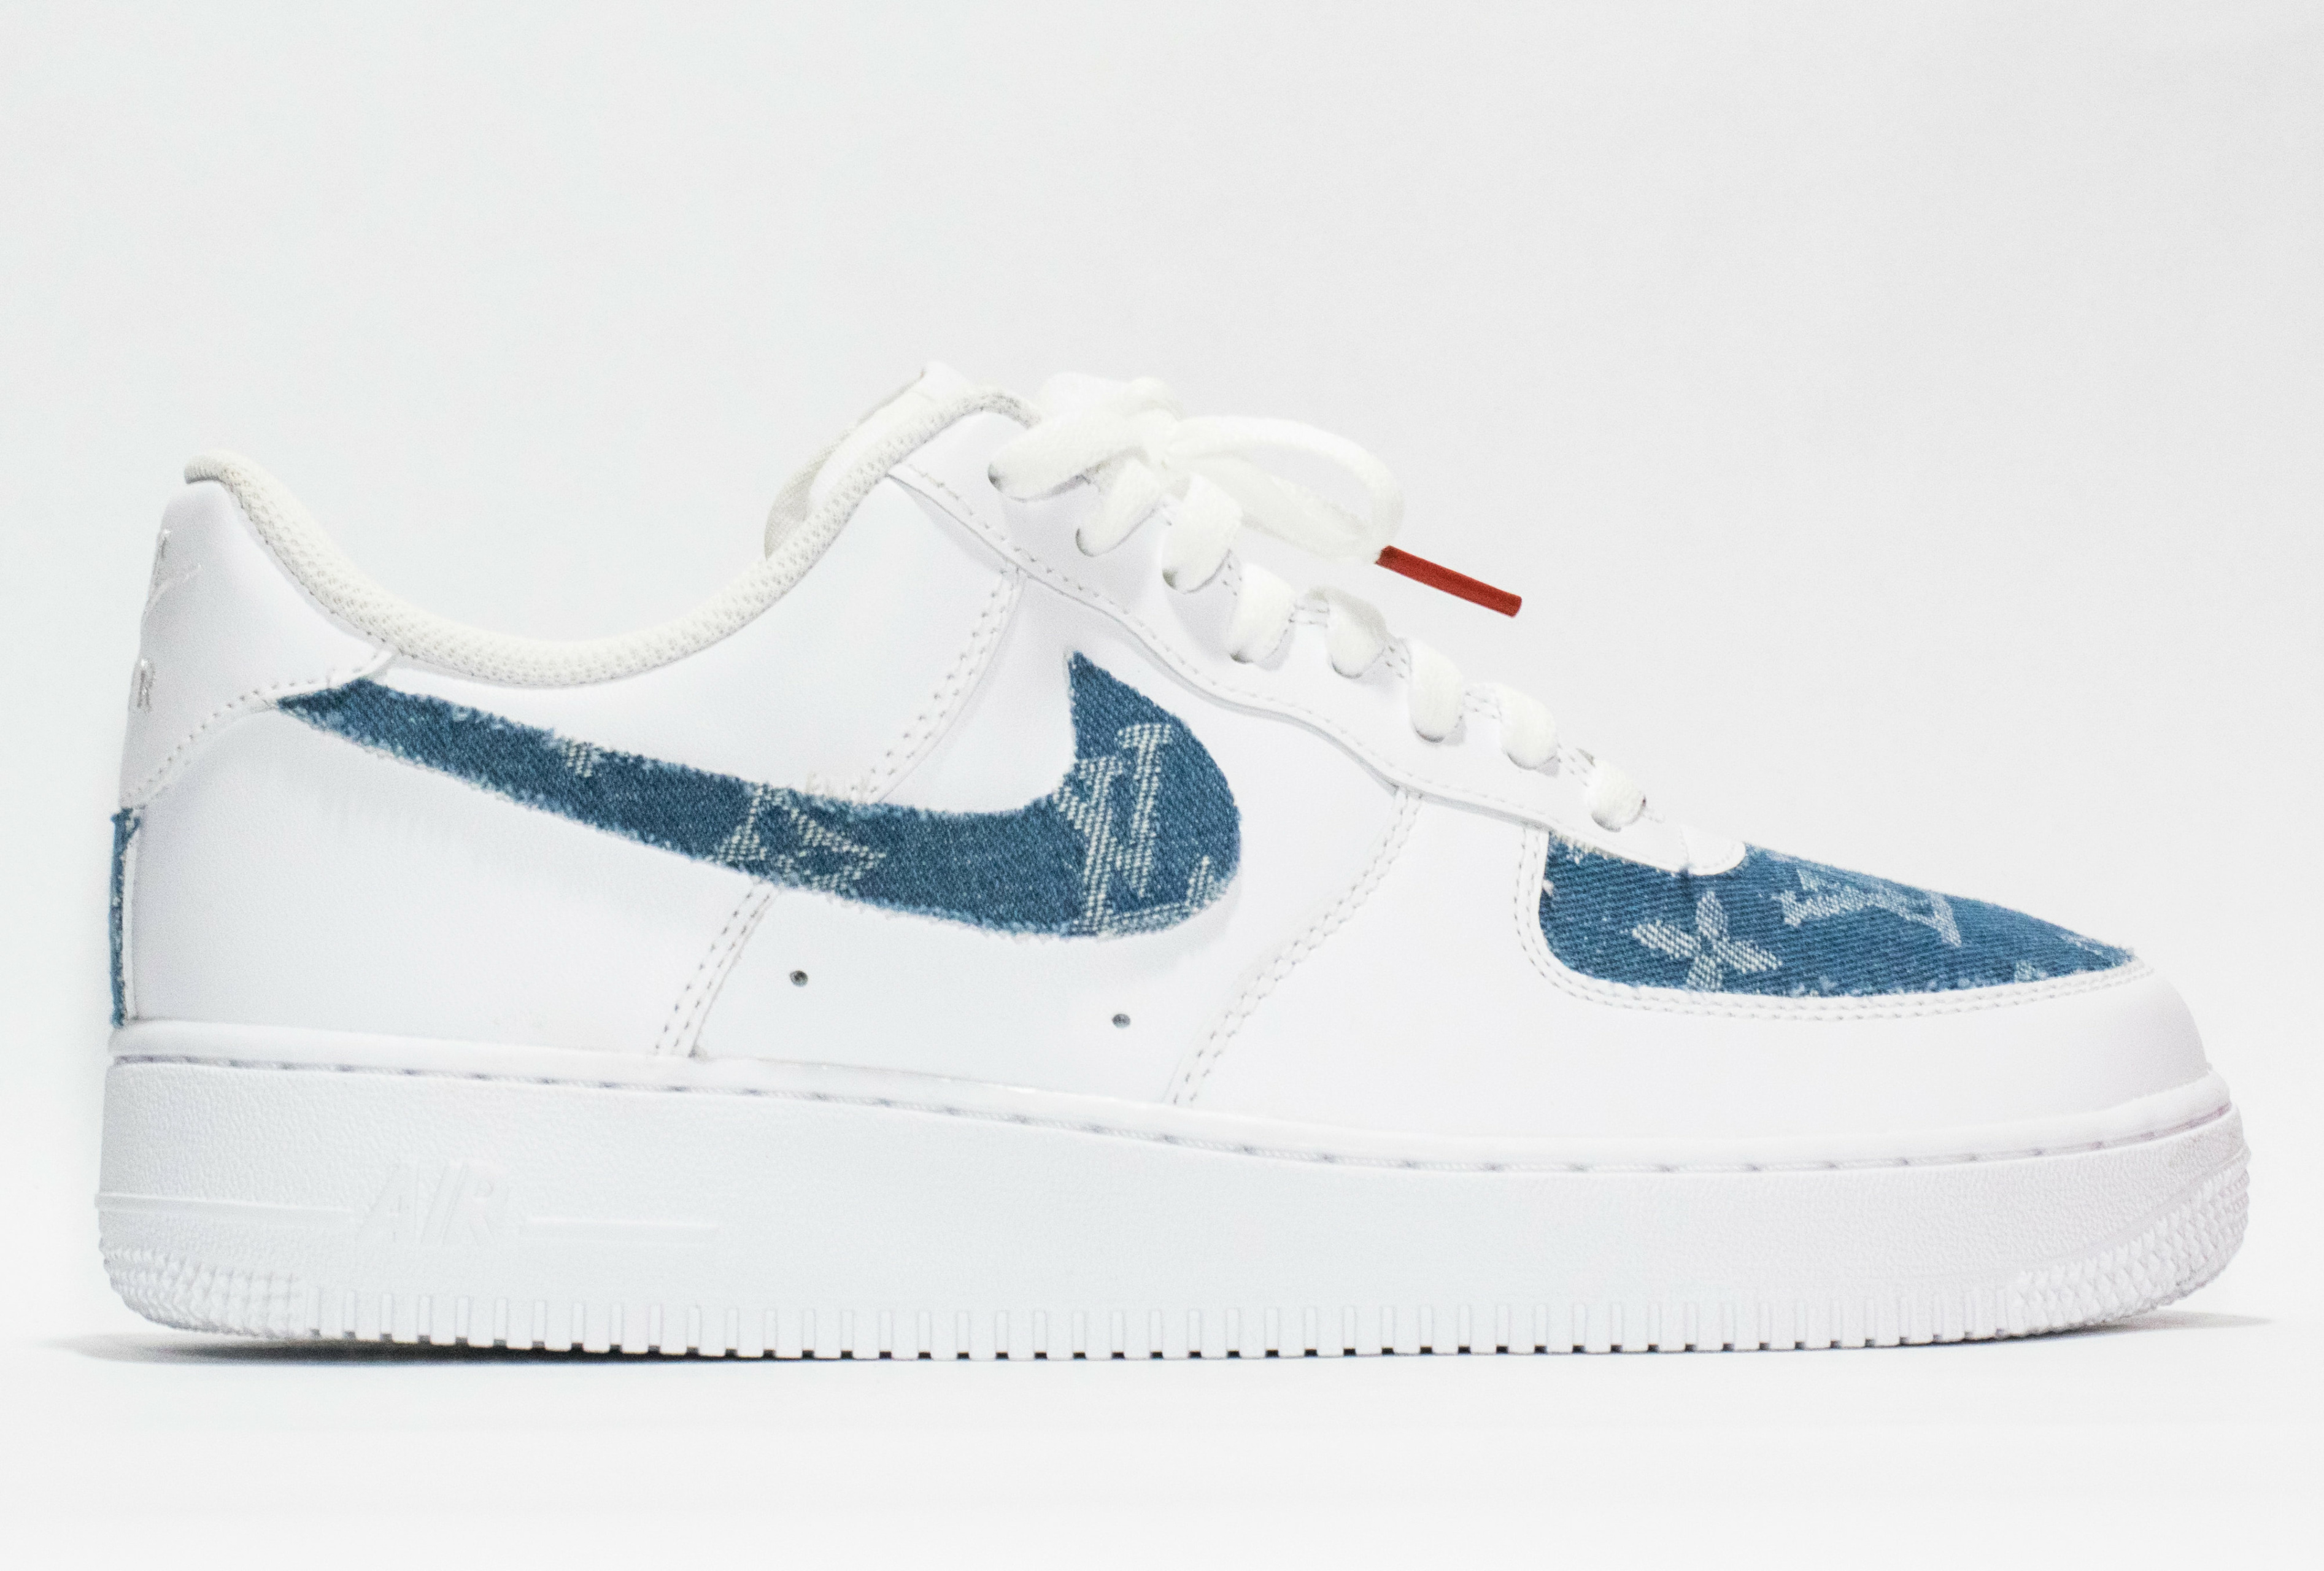 customized white air force 1